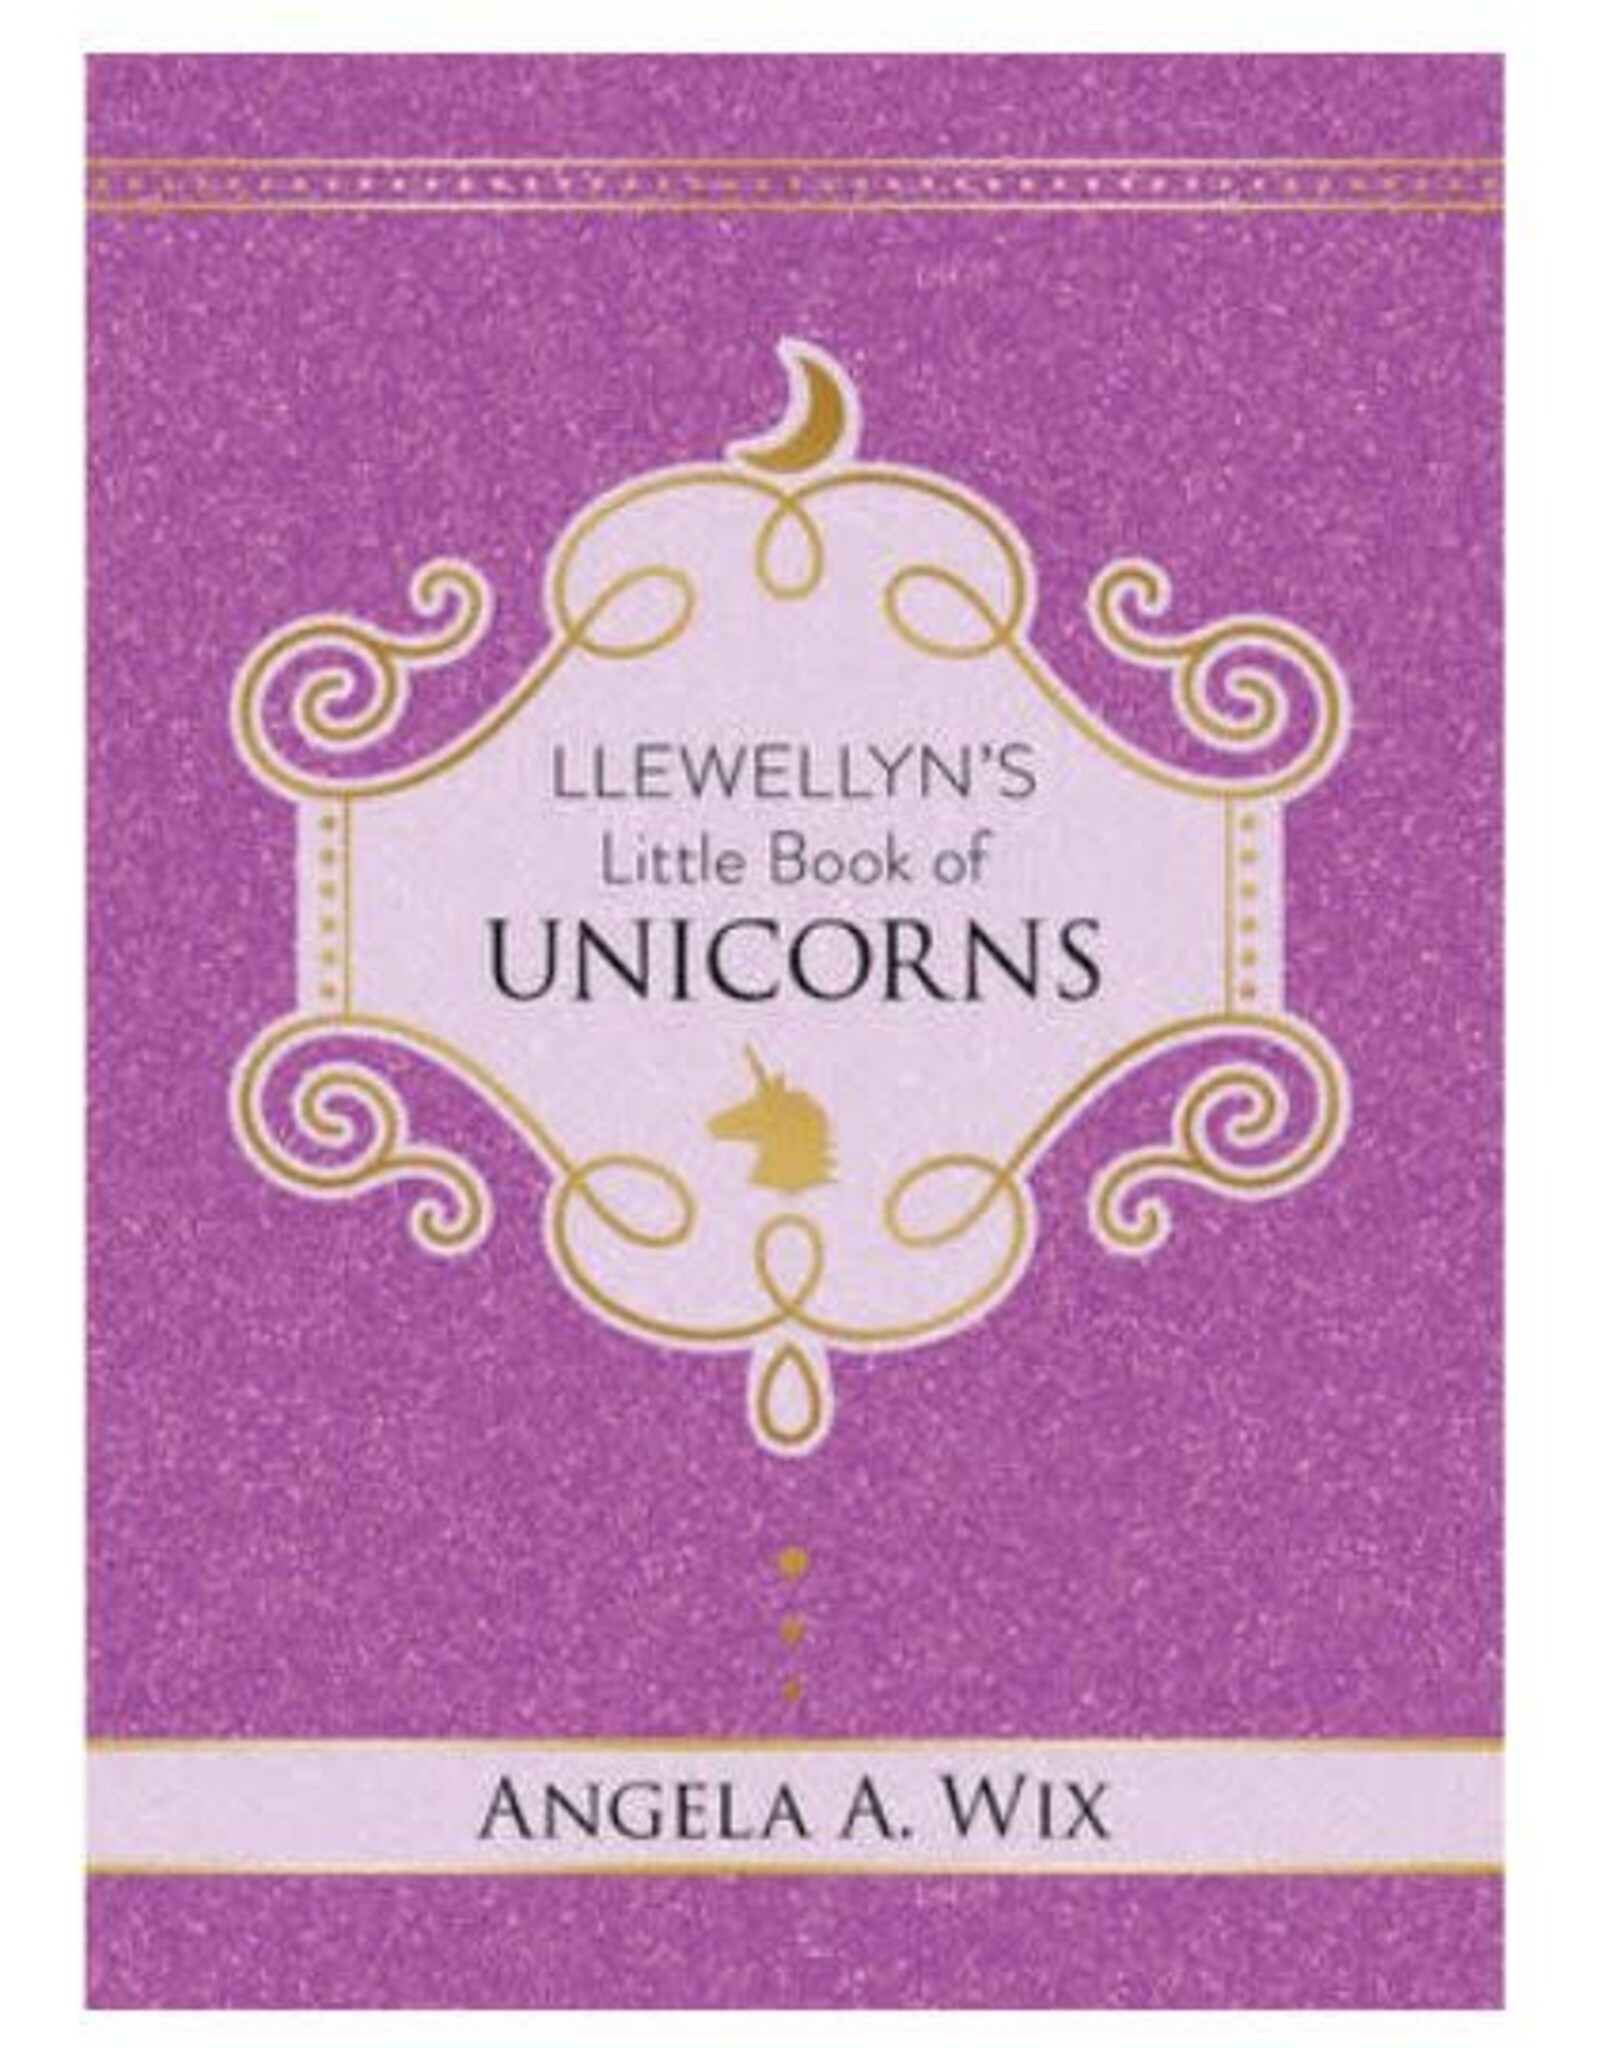 Llewellyn's Little Book of Unicorns by Angela A. Wix